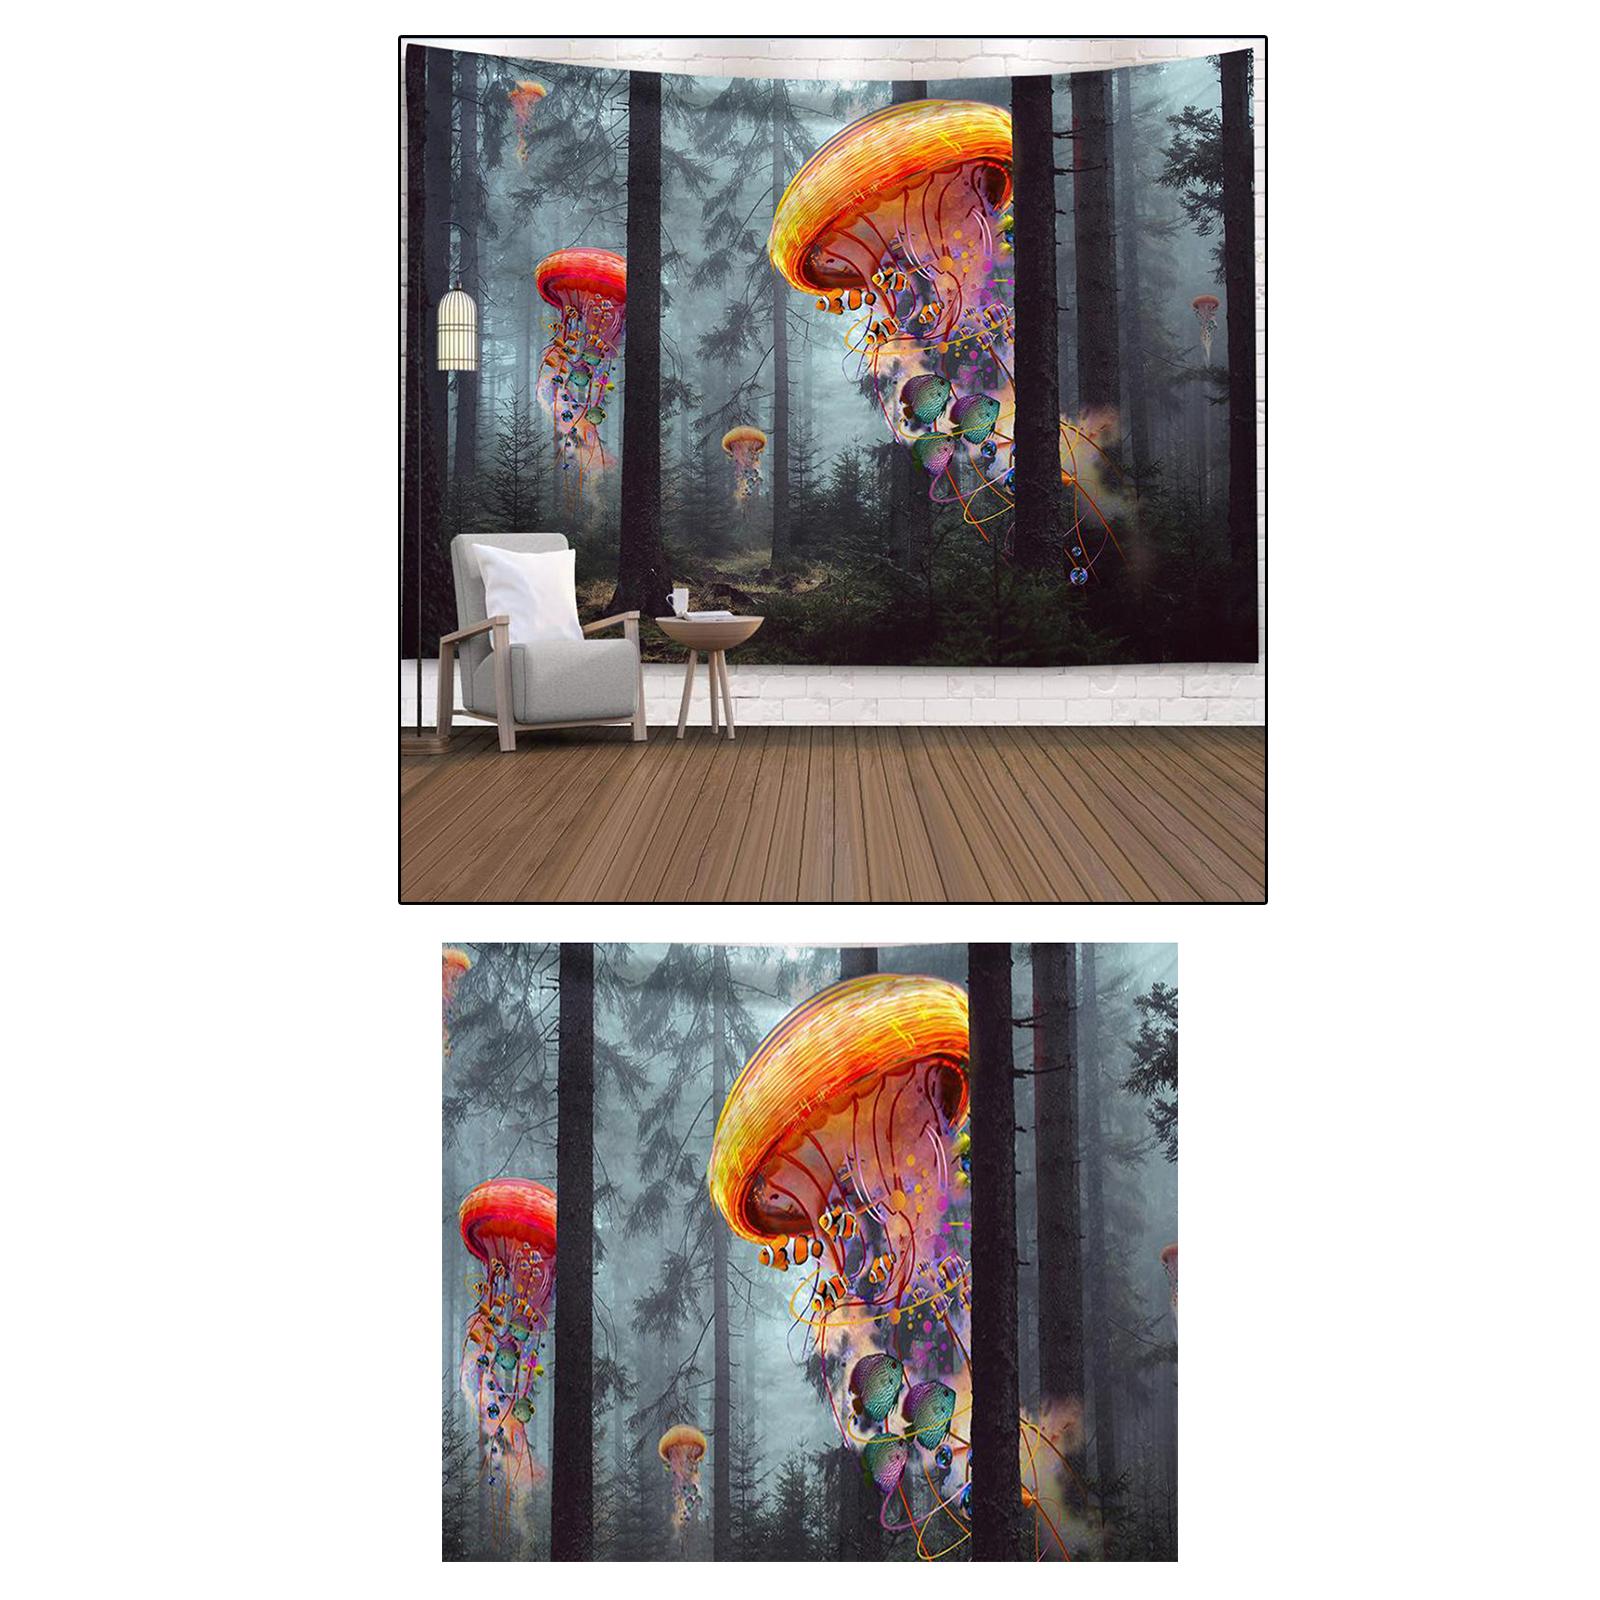 Nature Tapestry Wall Hanging Bedroom Living College Decor Style1 200x150cm